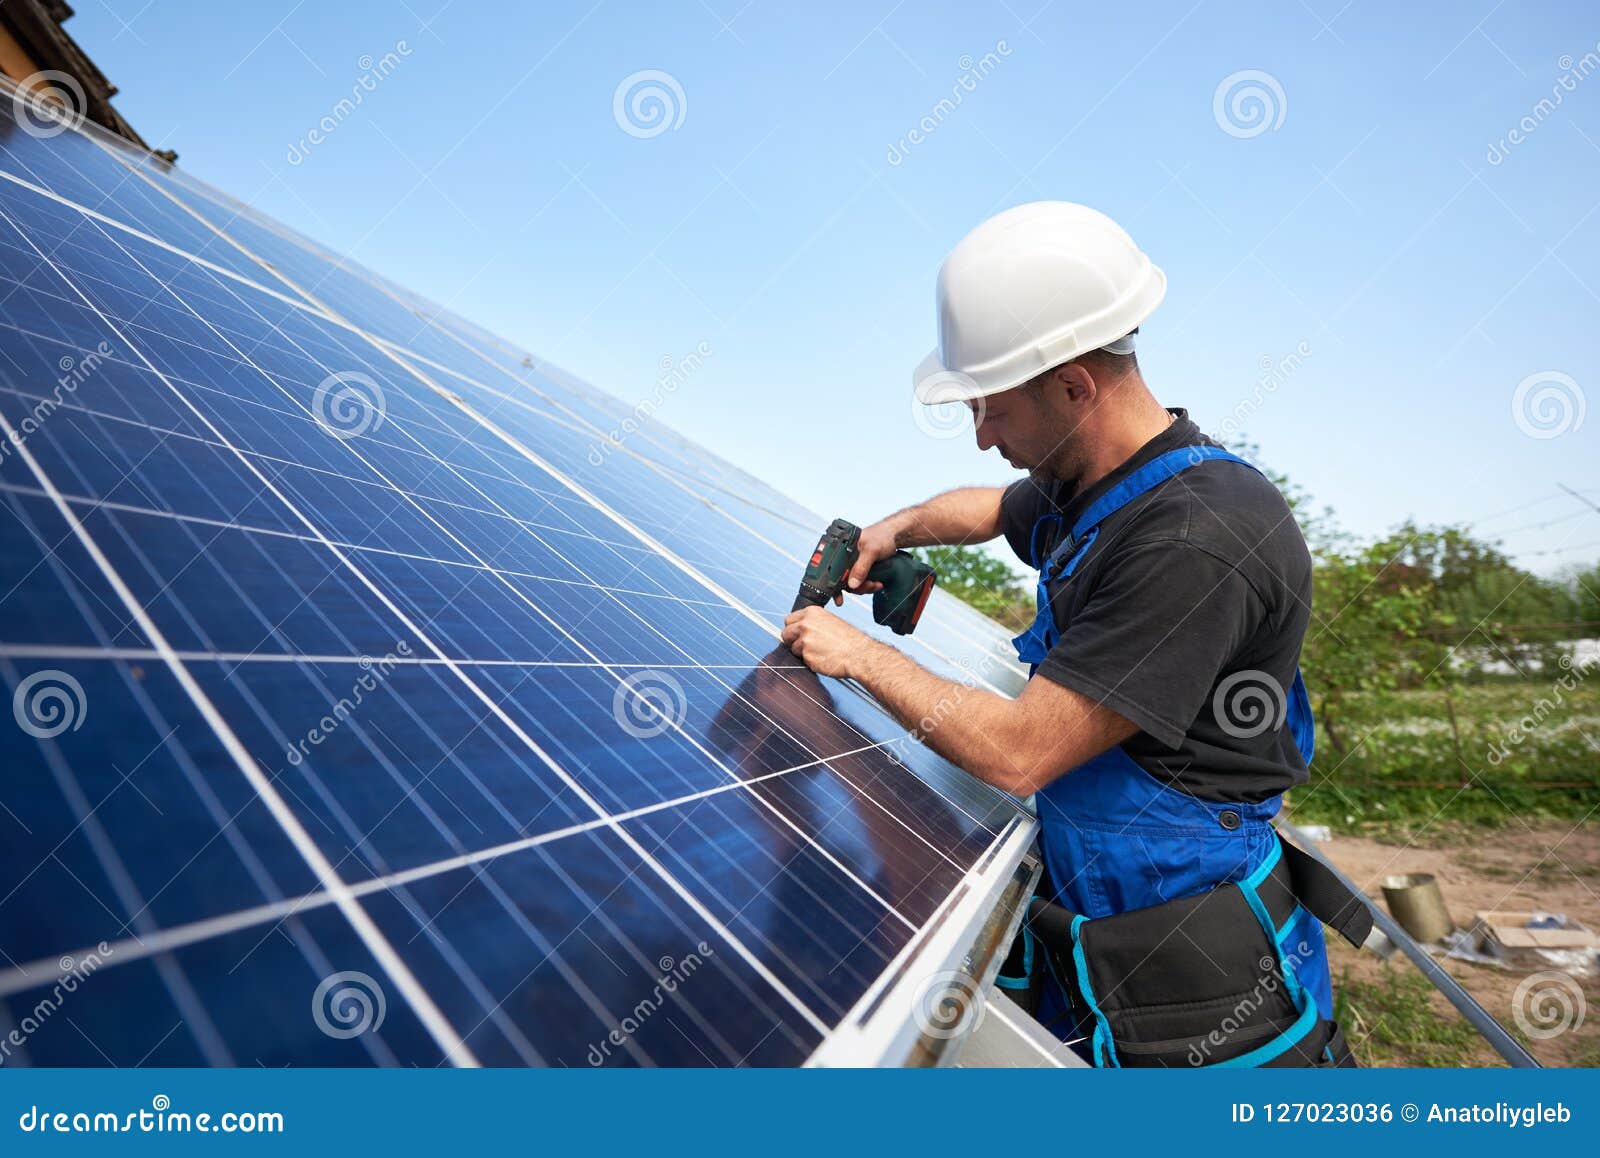 stand-alone exterior solar panel system installation, renewable green energy generation concept.